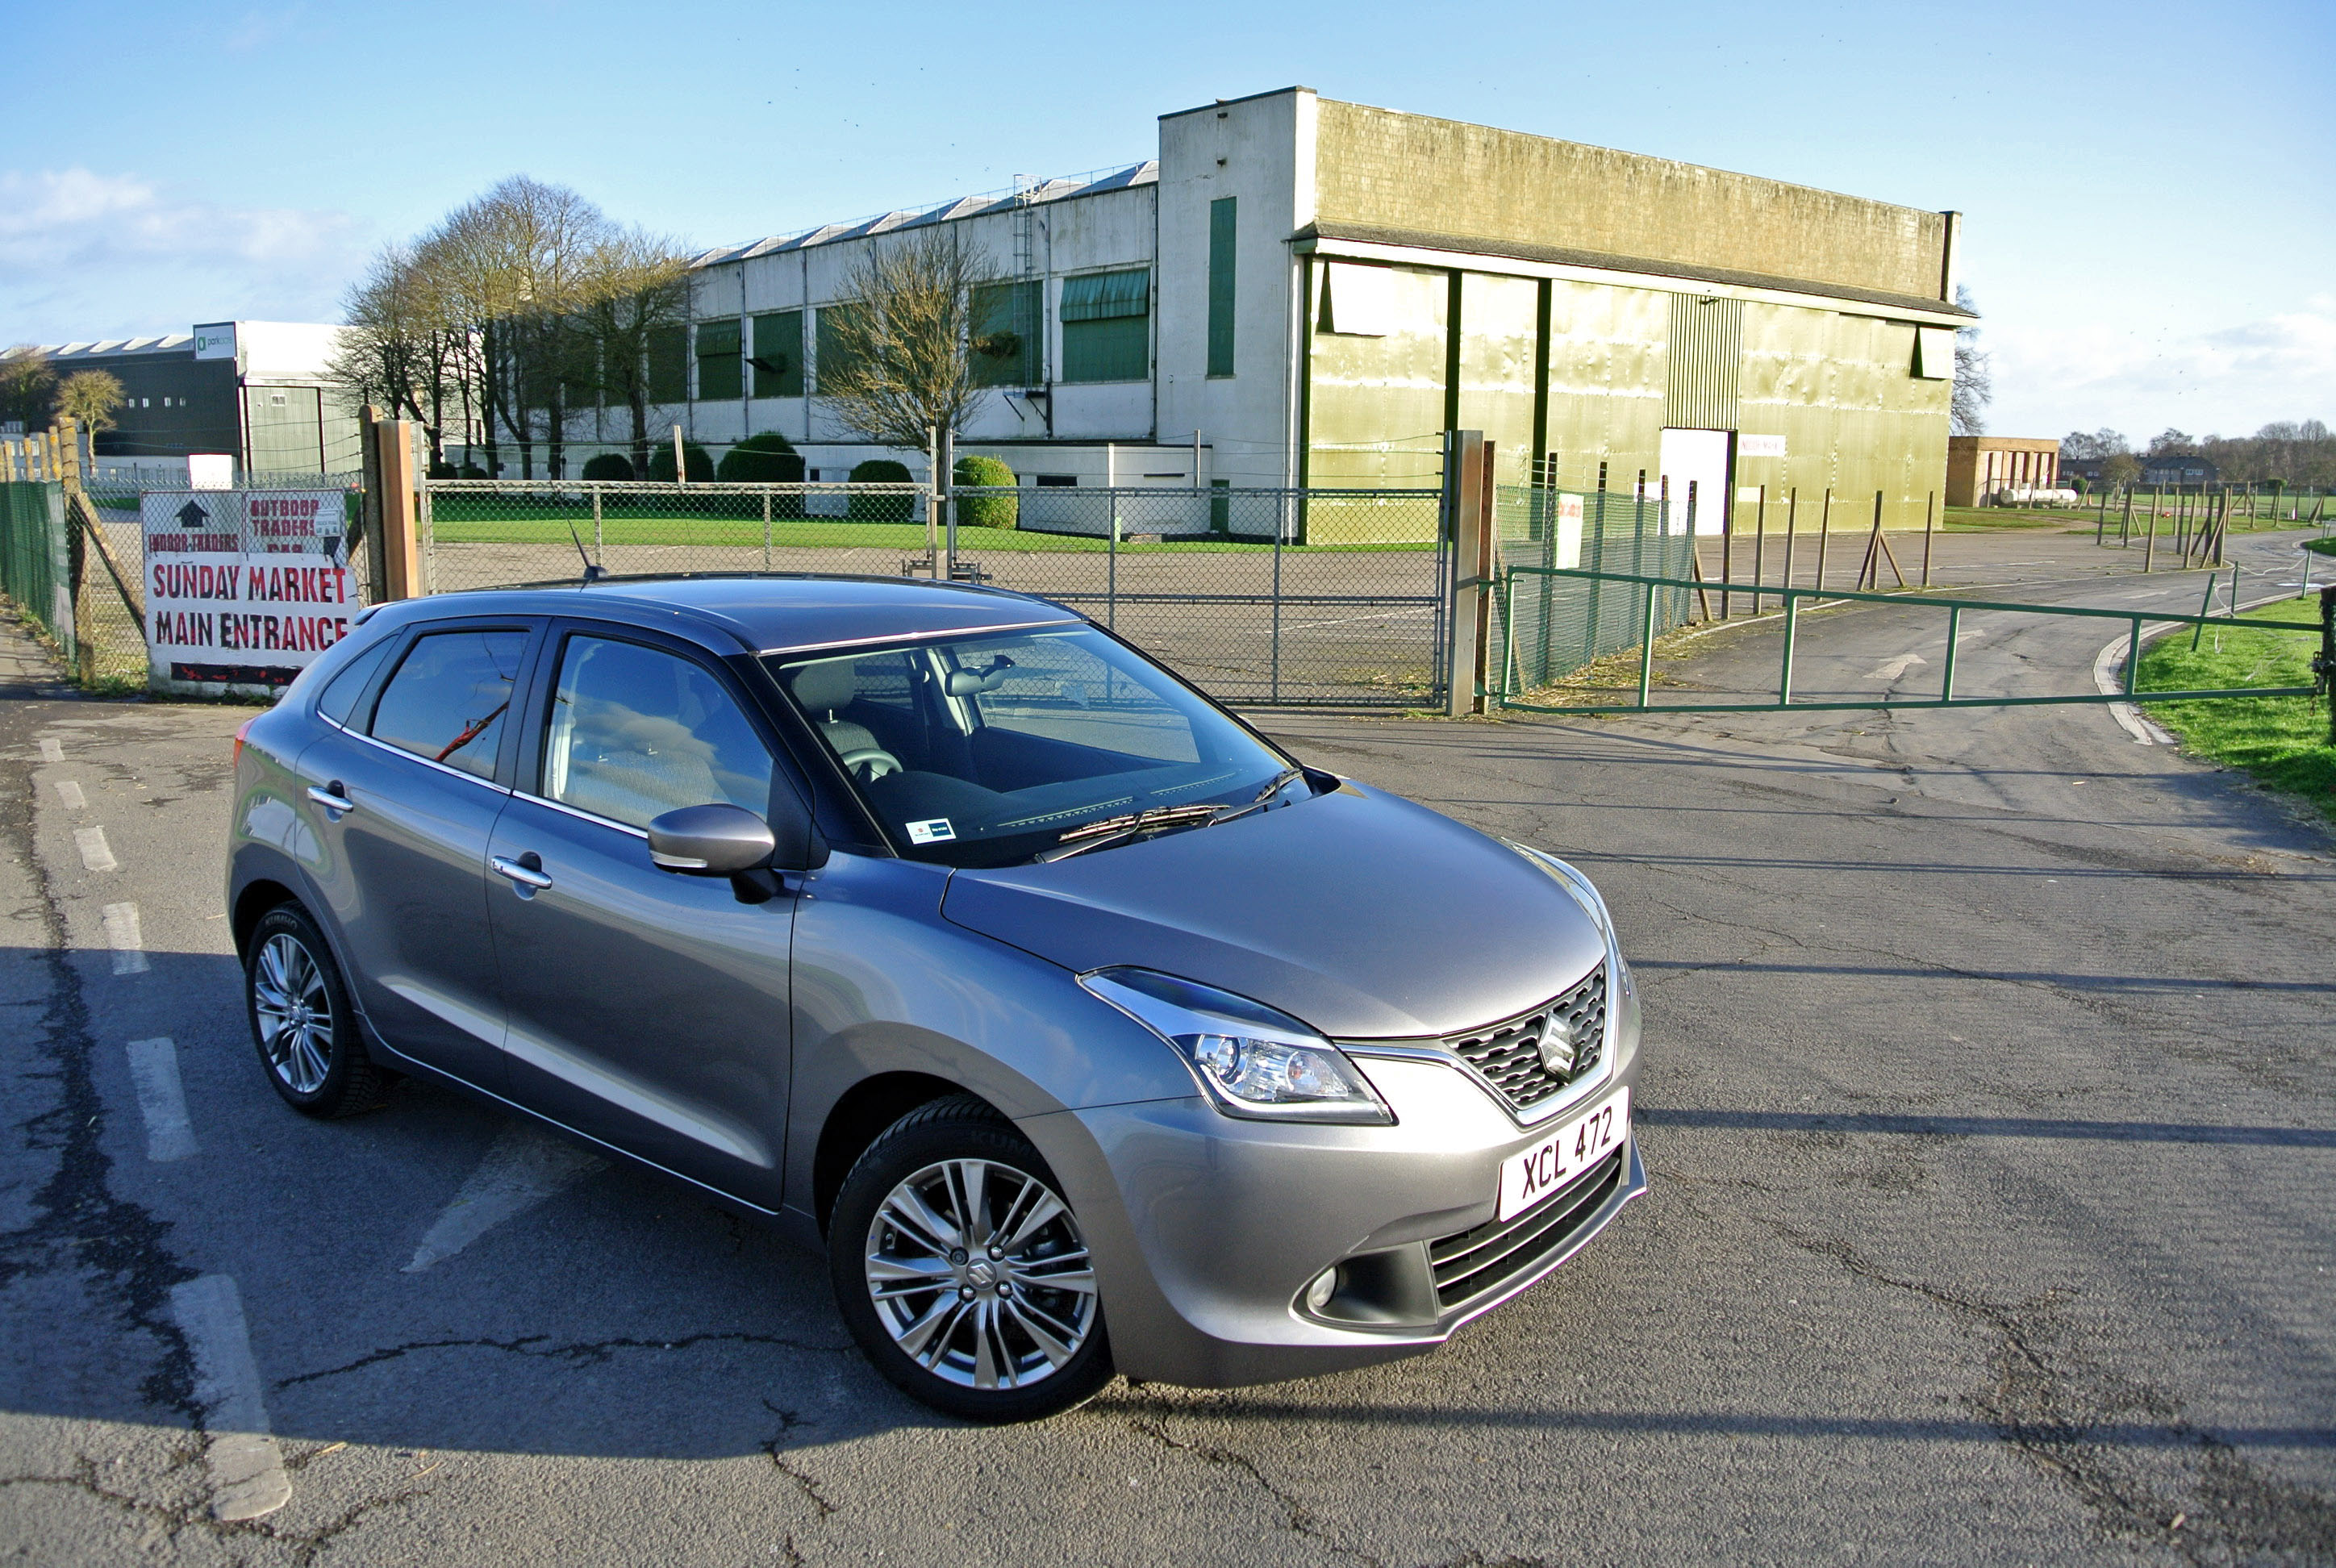 Long-term life with a Suzuki Baleno – Month 5 of 42